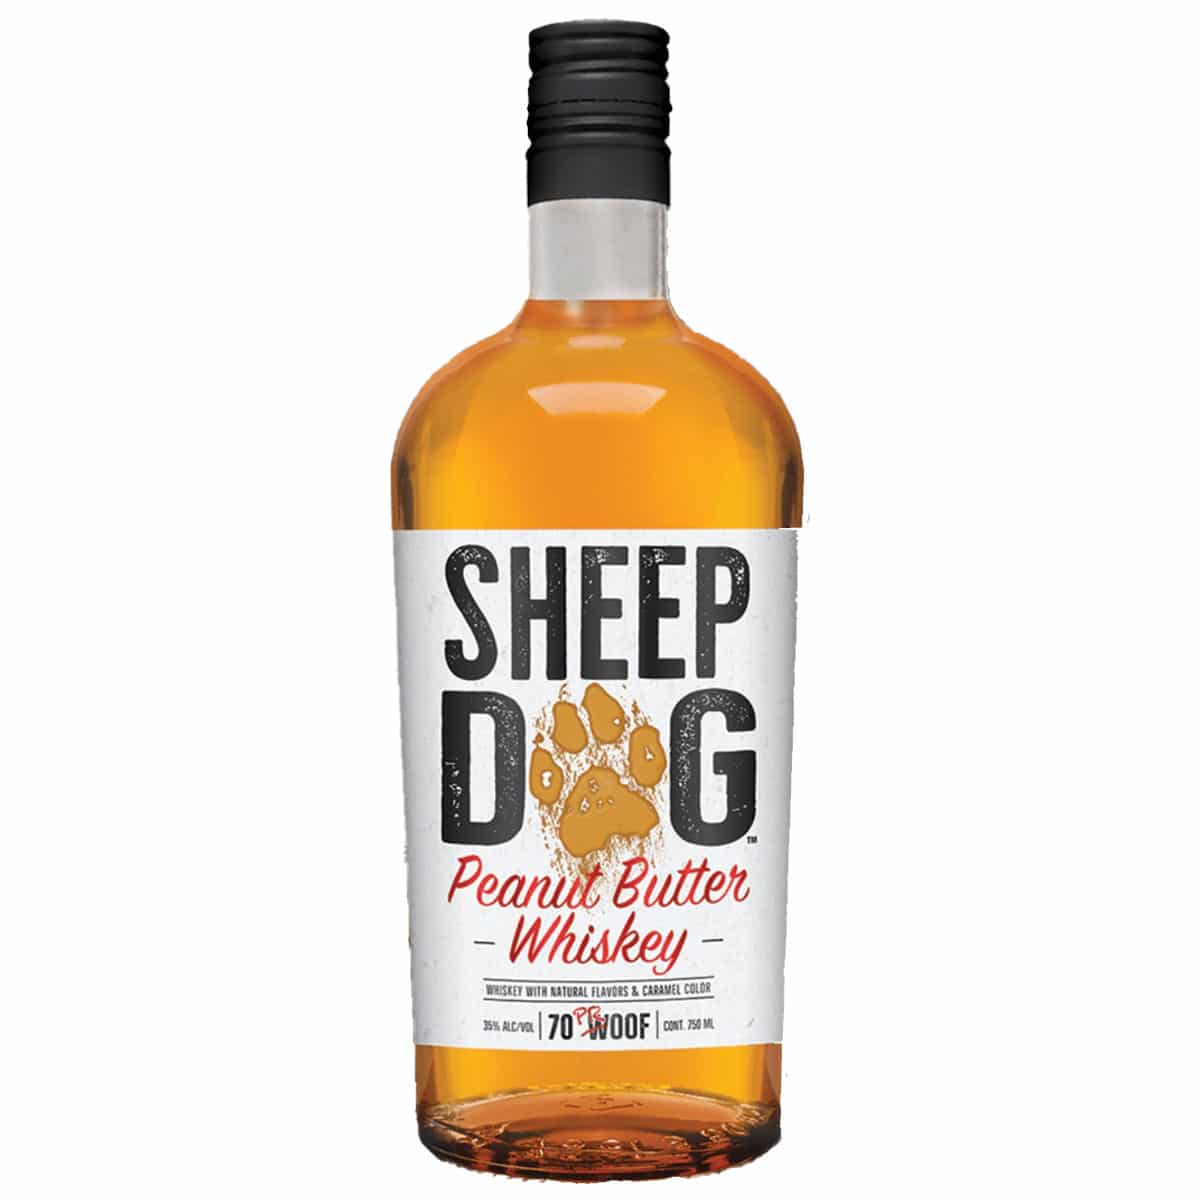 Sheep Dog Peanut Butter Flavored Whiskey - Barbank